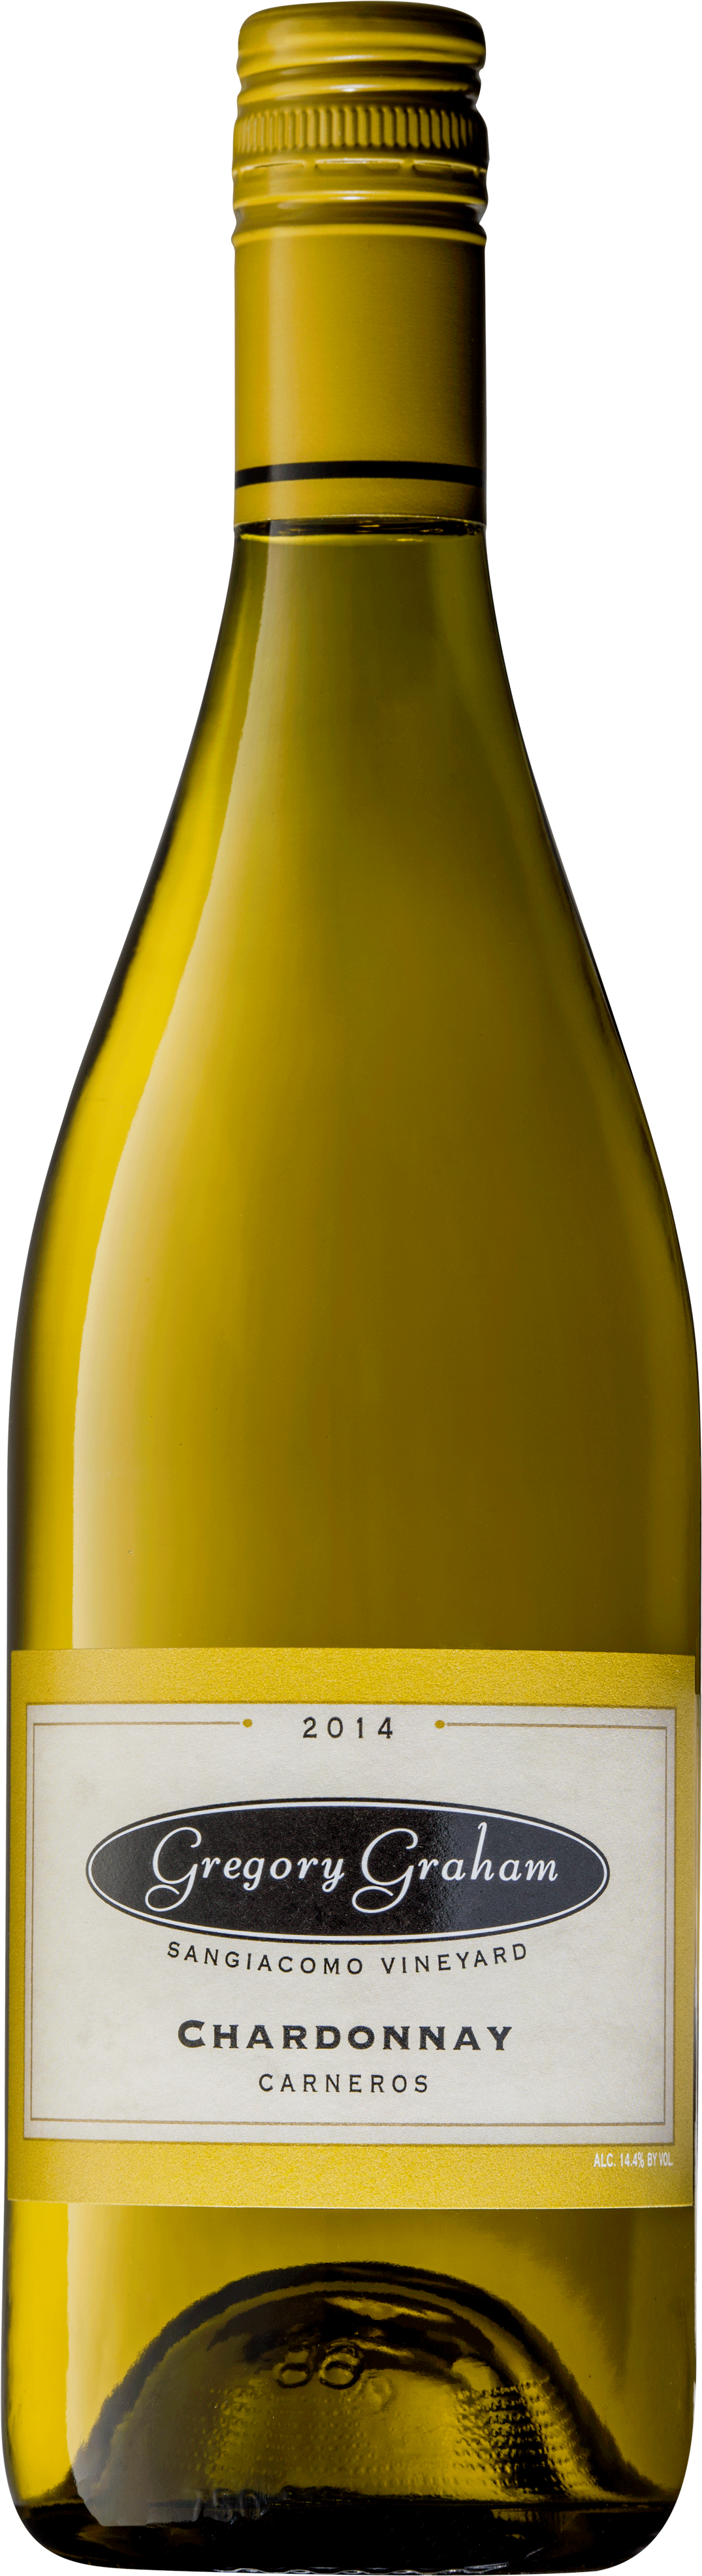 Product Image for 2021 Carneros Chardonnay 